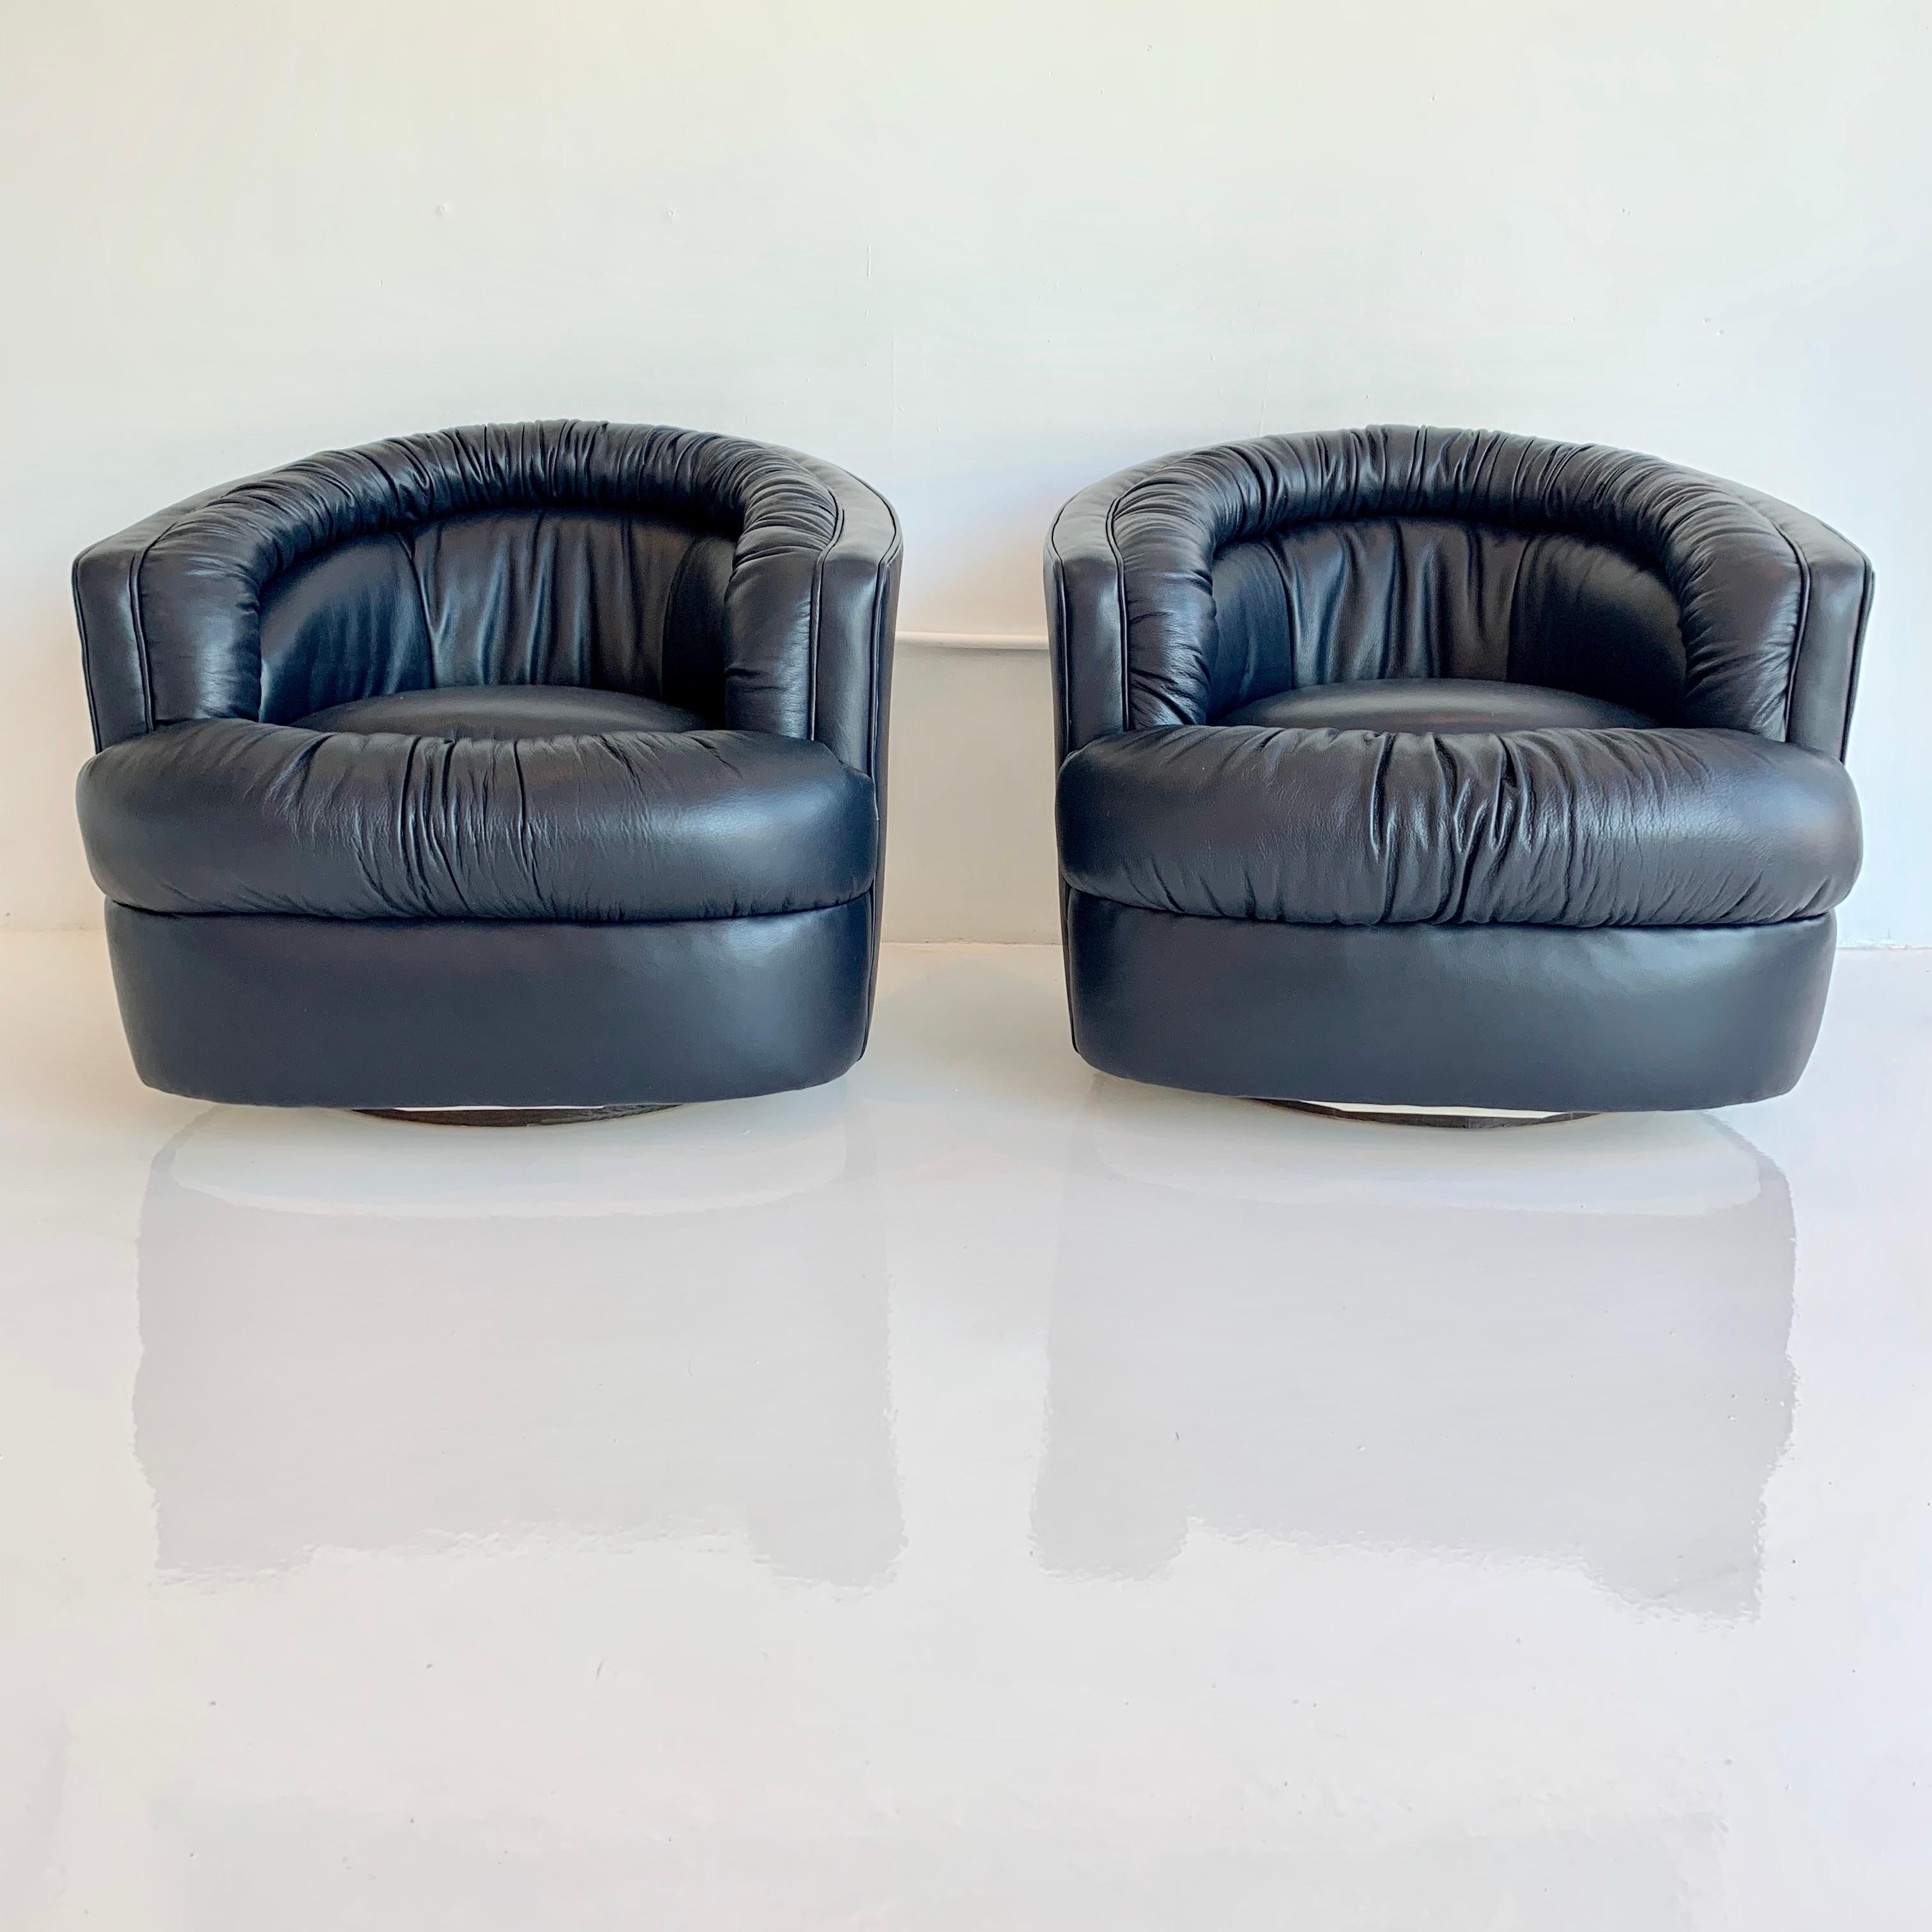 Stunning pair of leather swivel chairs made by Merit, Los Angeles. Round swivel chairs with ruched leather. Perfect scale. Extremely comfortable. Available COM. Lead time 4-5 weeks.